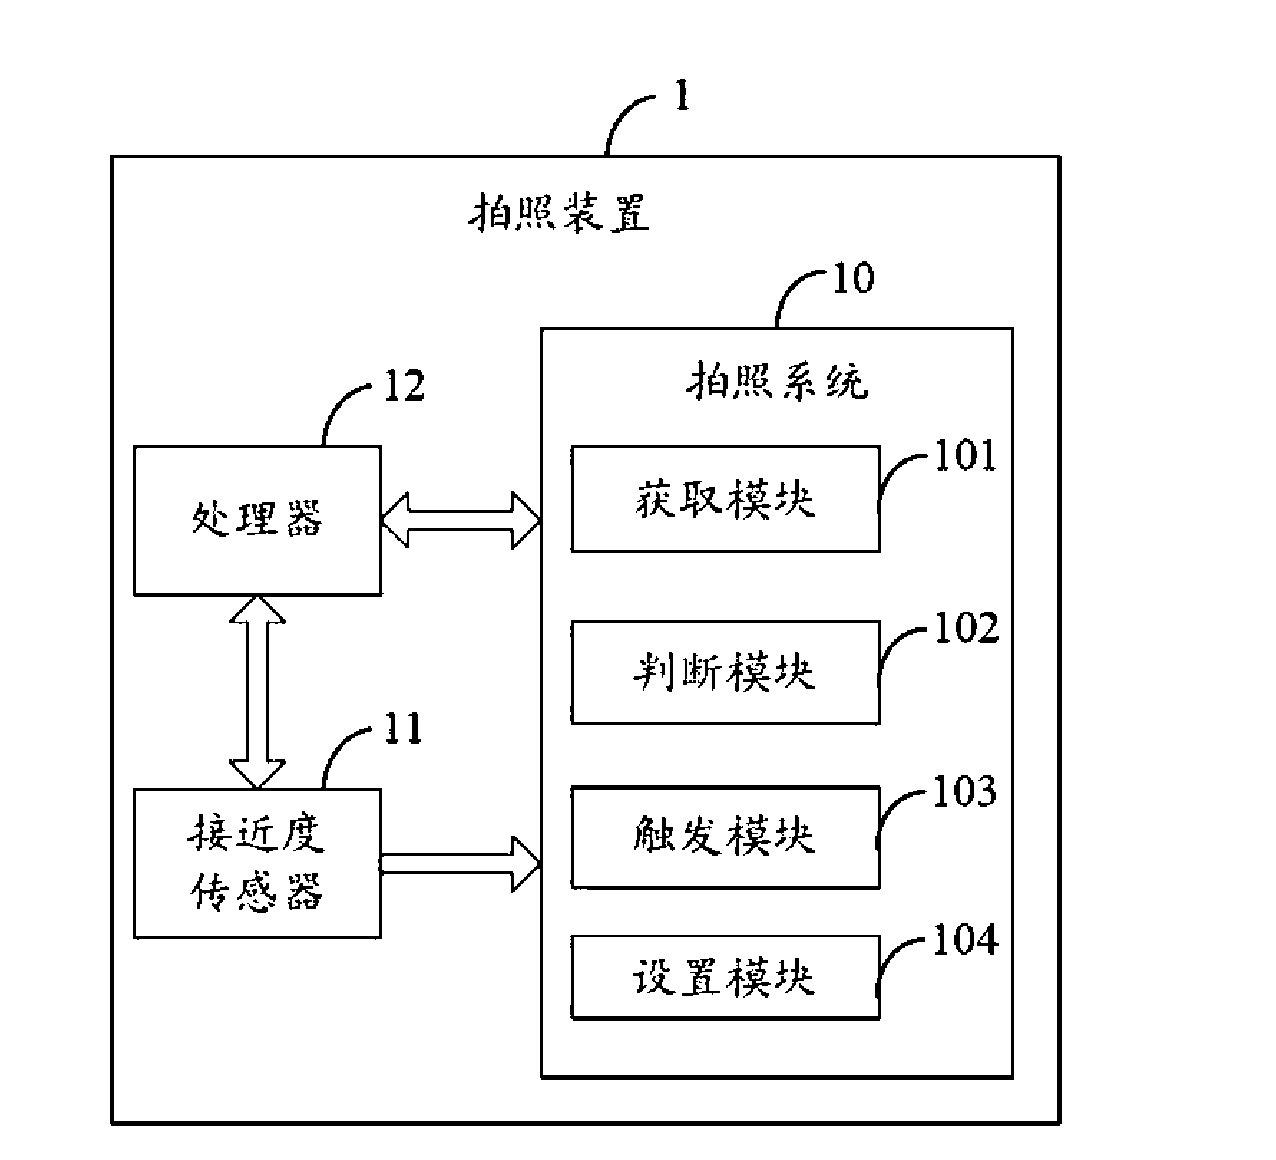 Photographic system and method